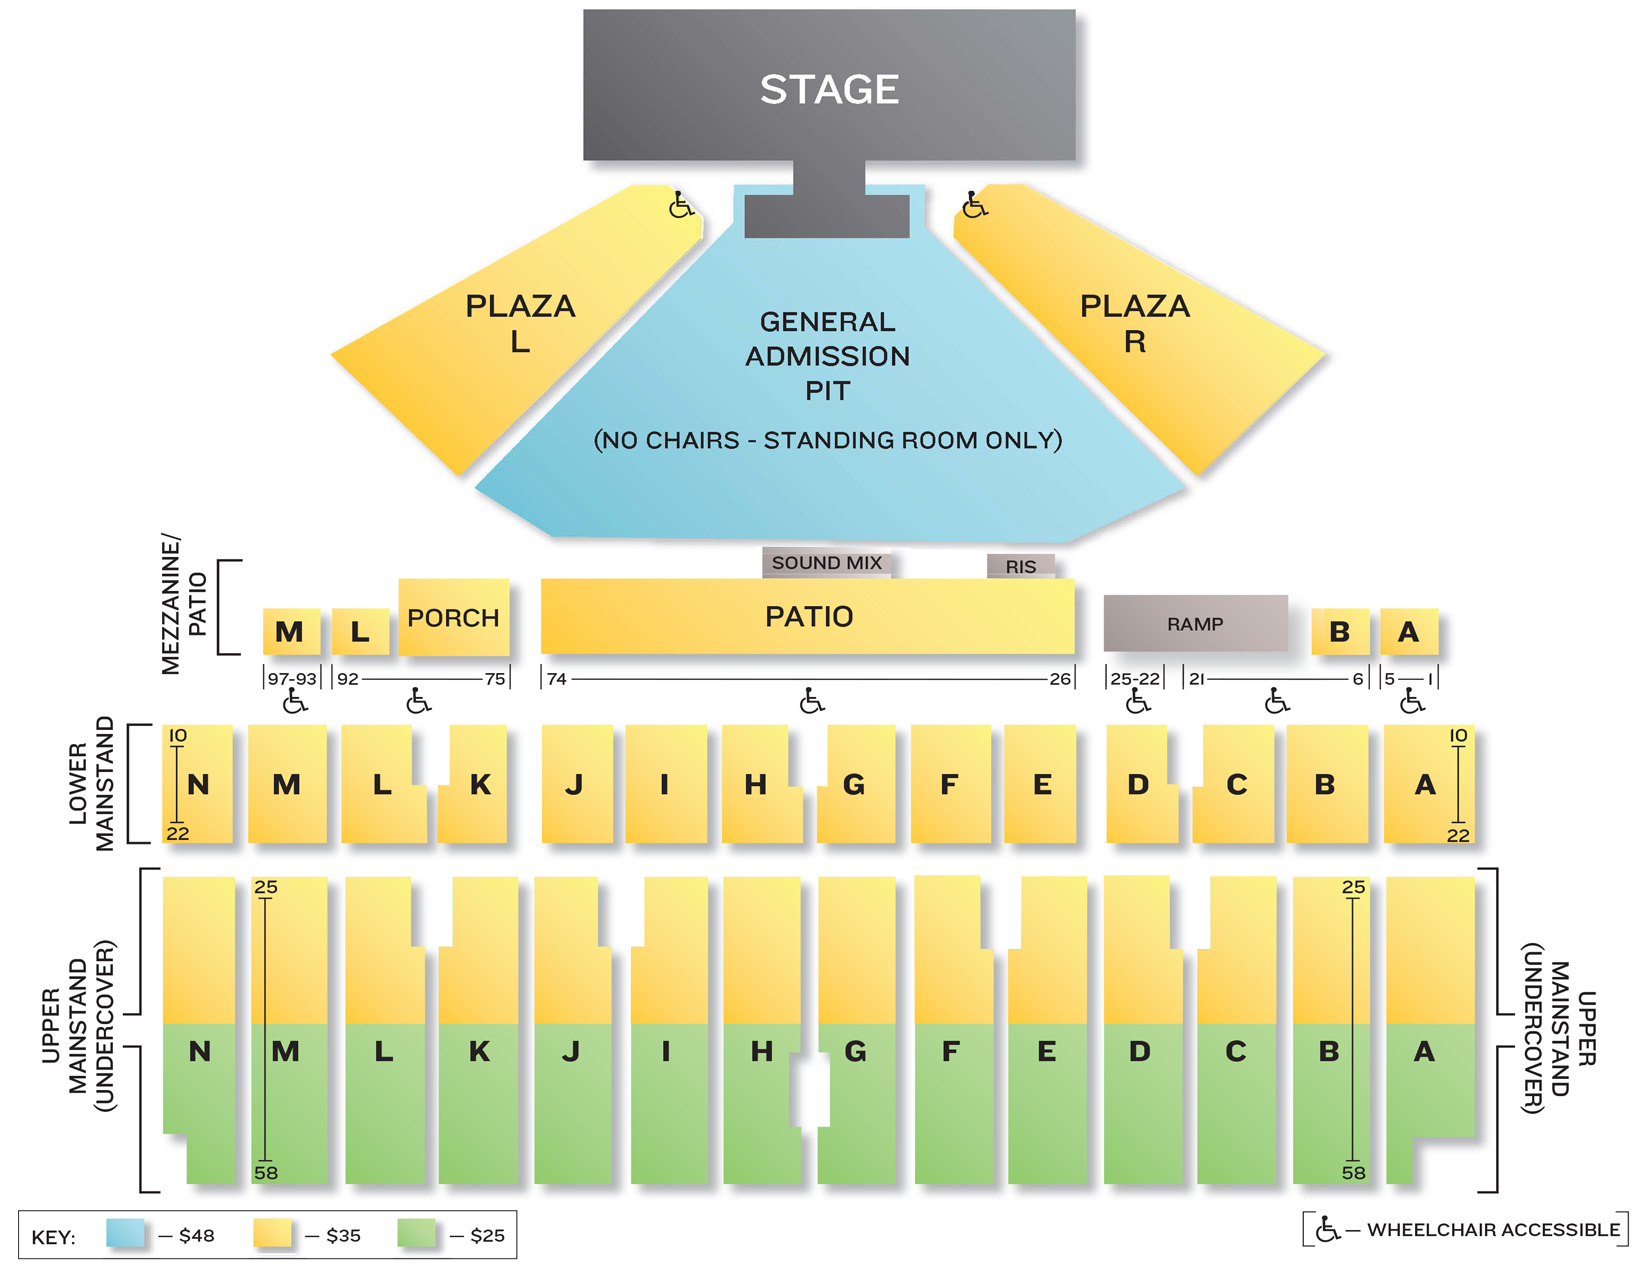 State Fair Seating Chart Mn